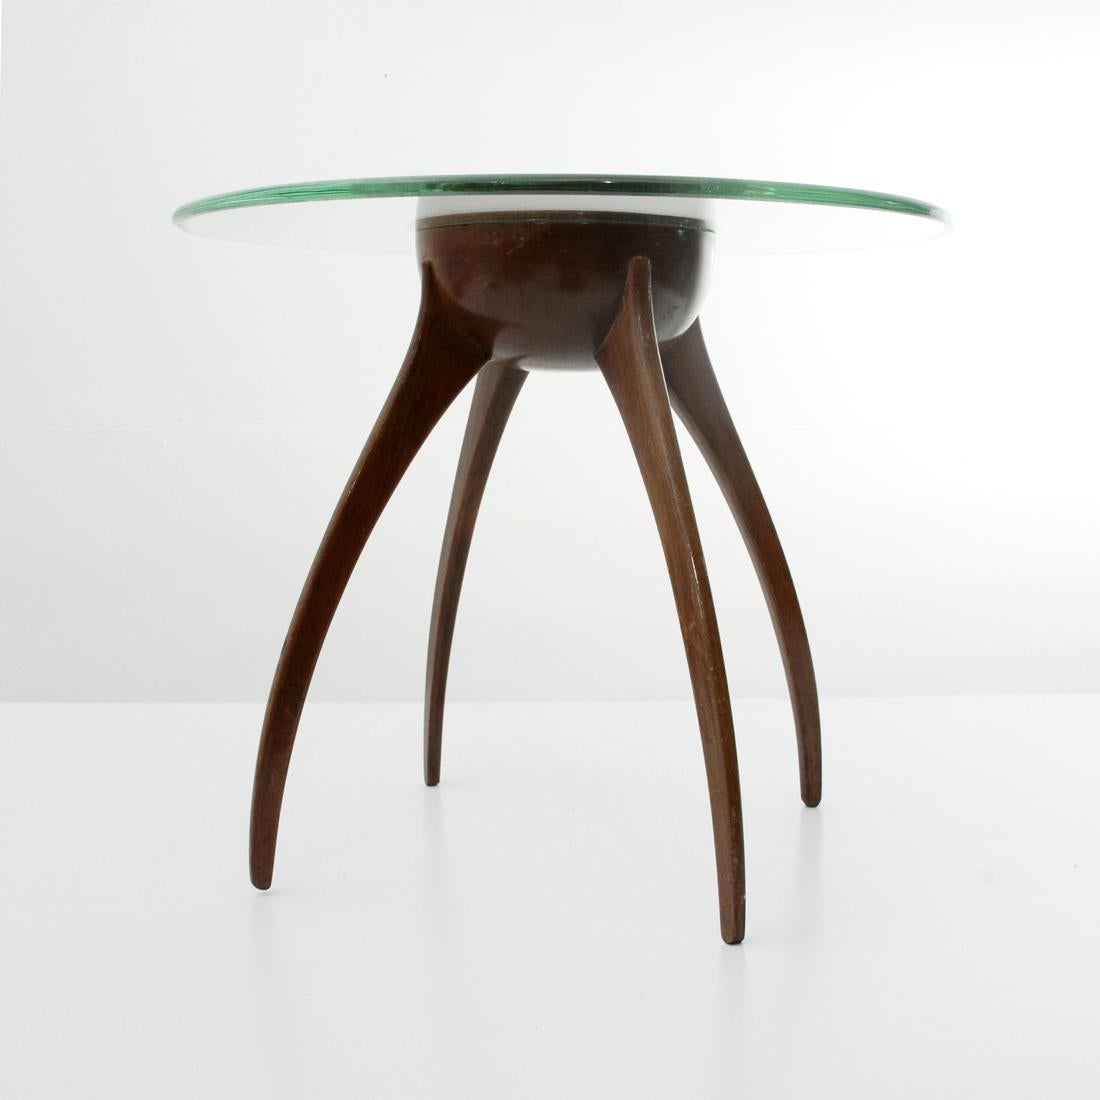 Italian Midcentury Coffee Table with Copper Cup, 1940s 1